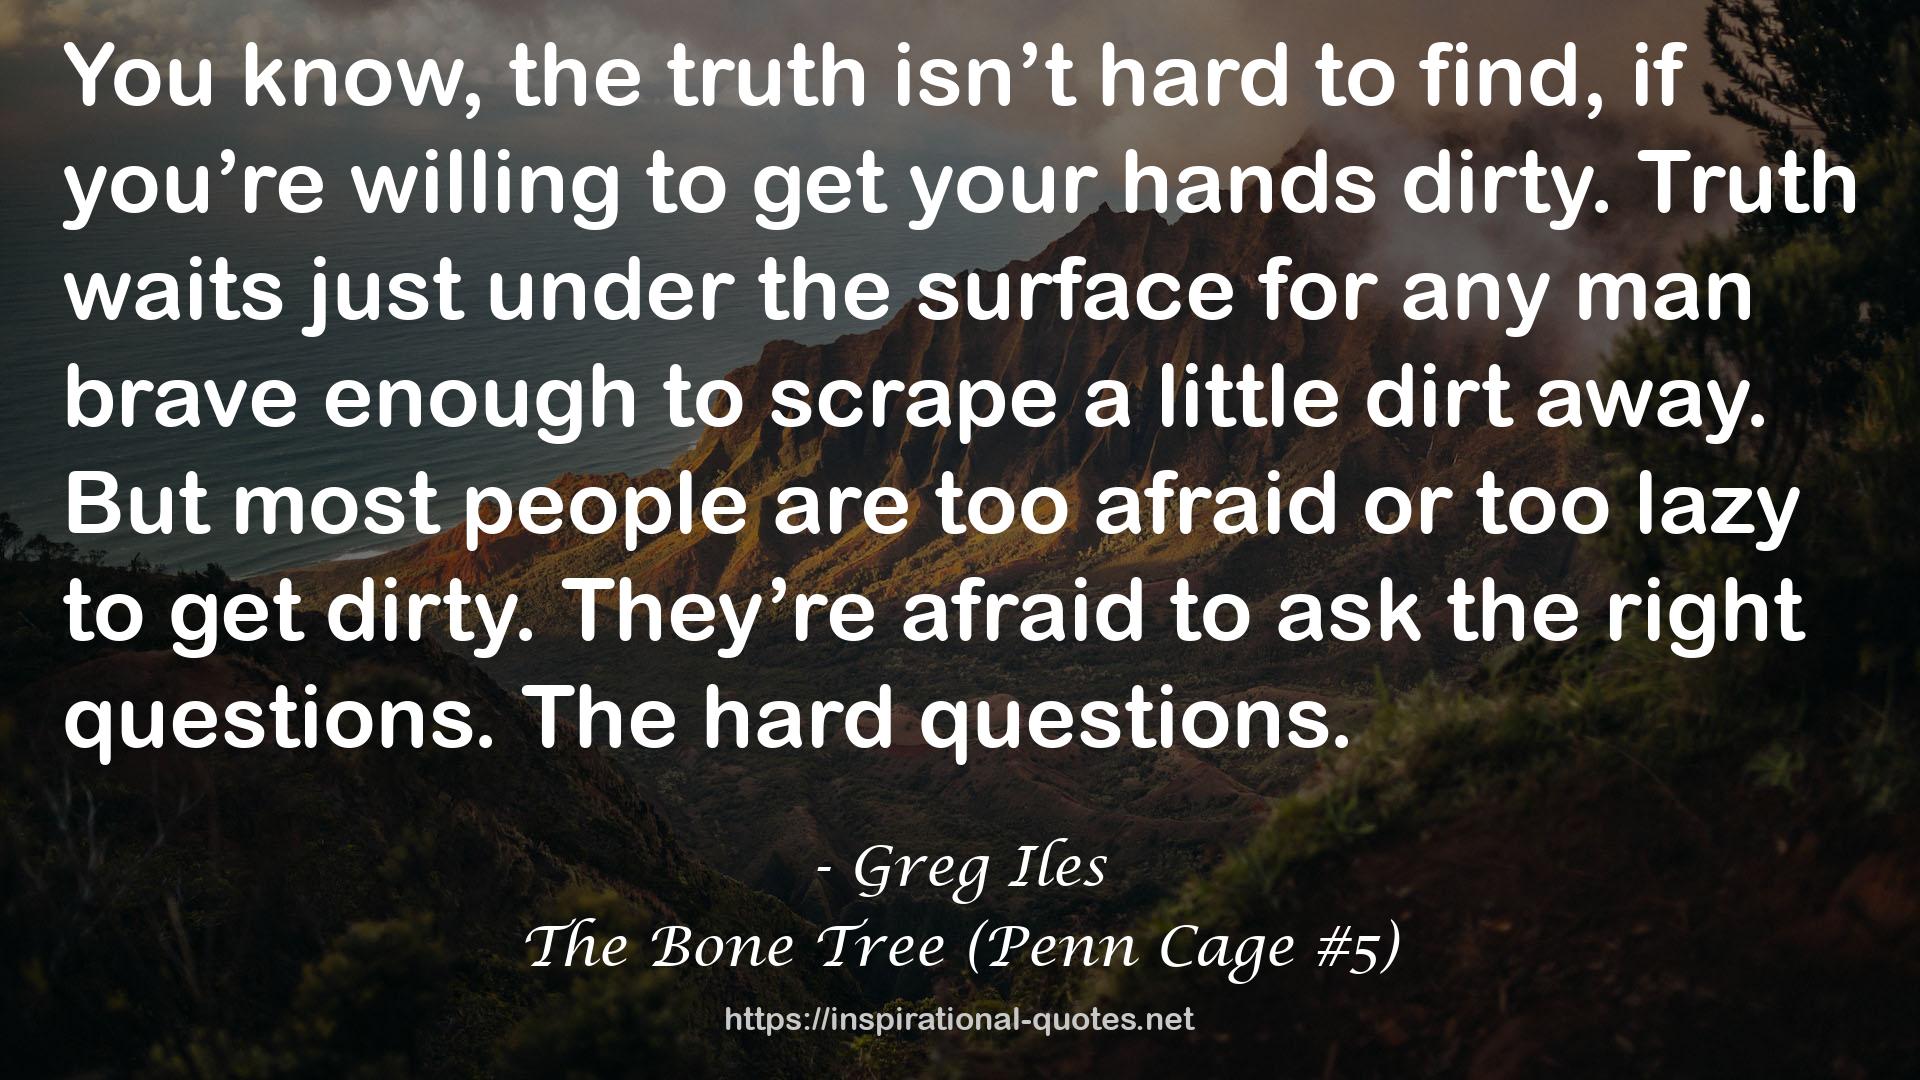 The Bone Tree (Penn Cage #5) QUOTES